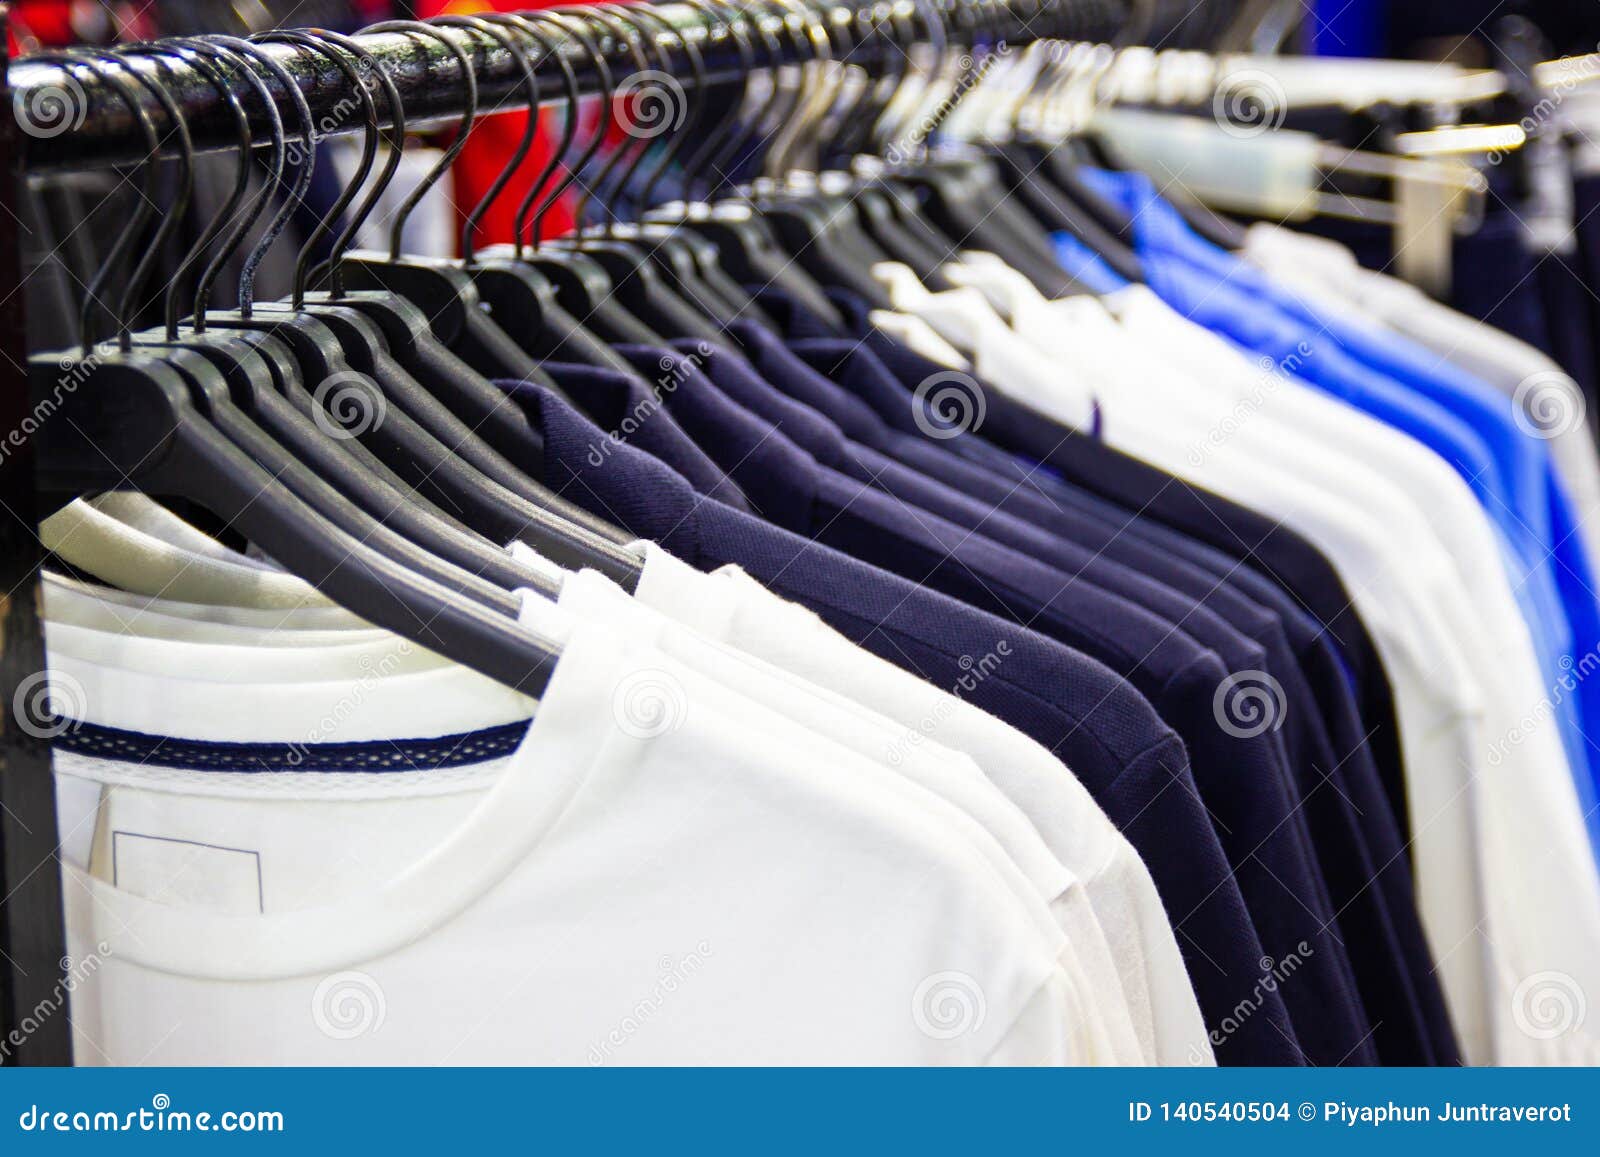 T-shirt on Hangers for Sale in Department Stores. Stock Photo - Image ...